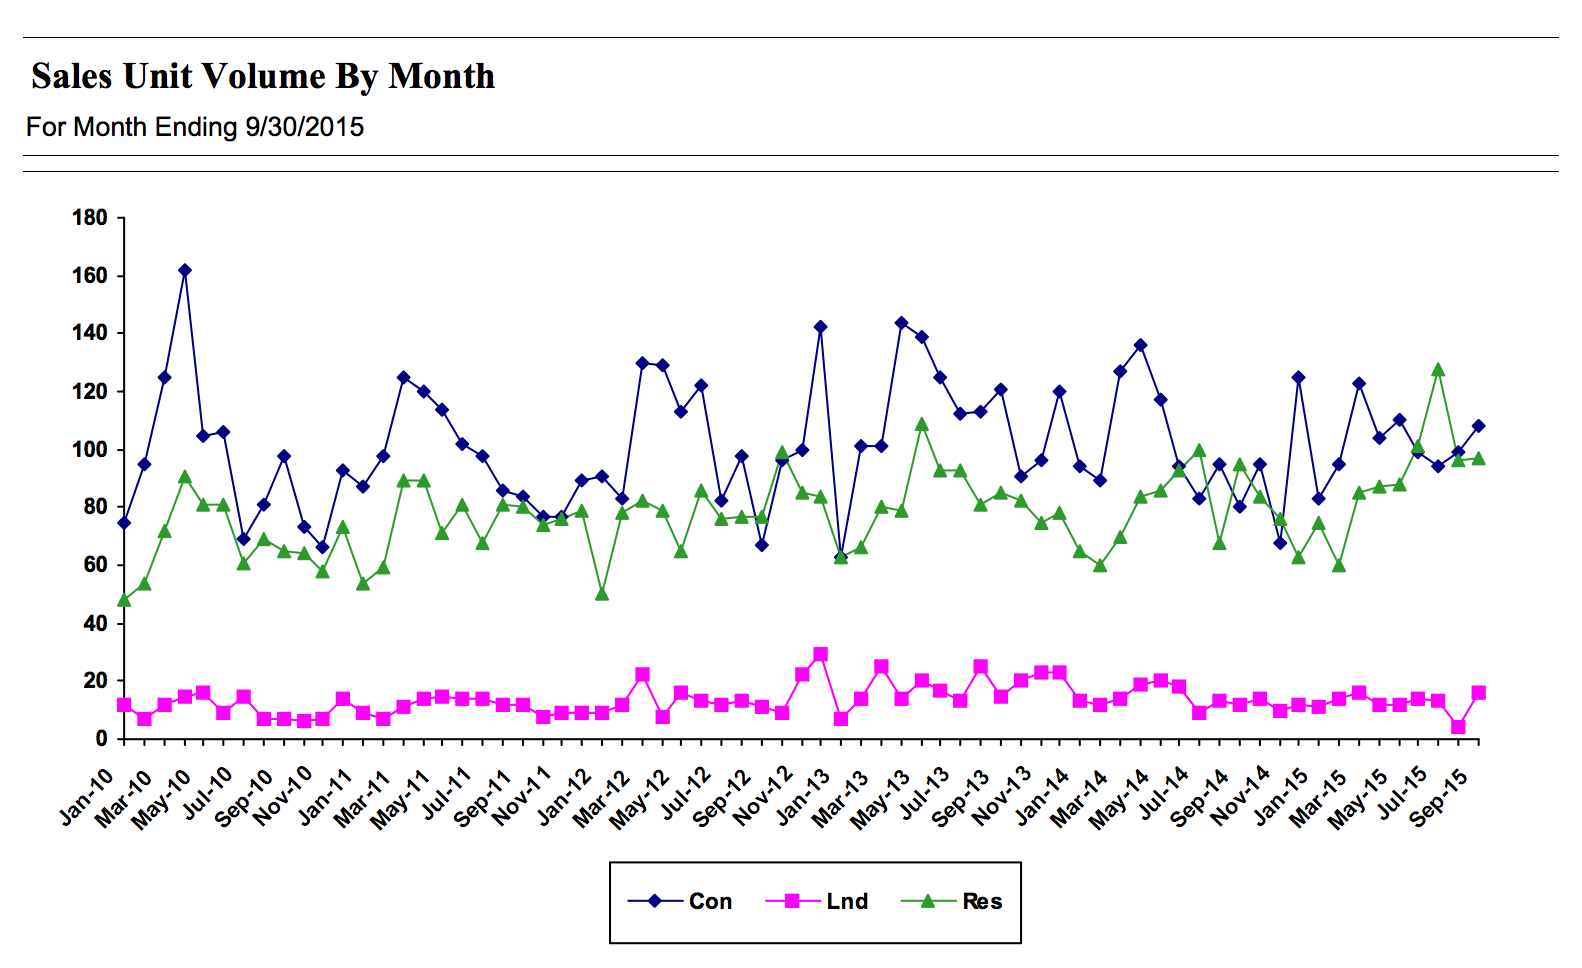 Sales unit volume by month. Graphic provided by RAM.